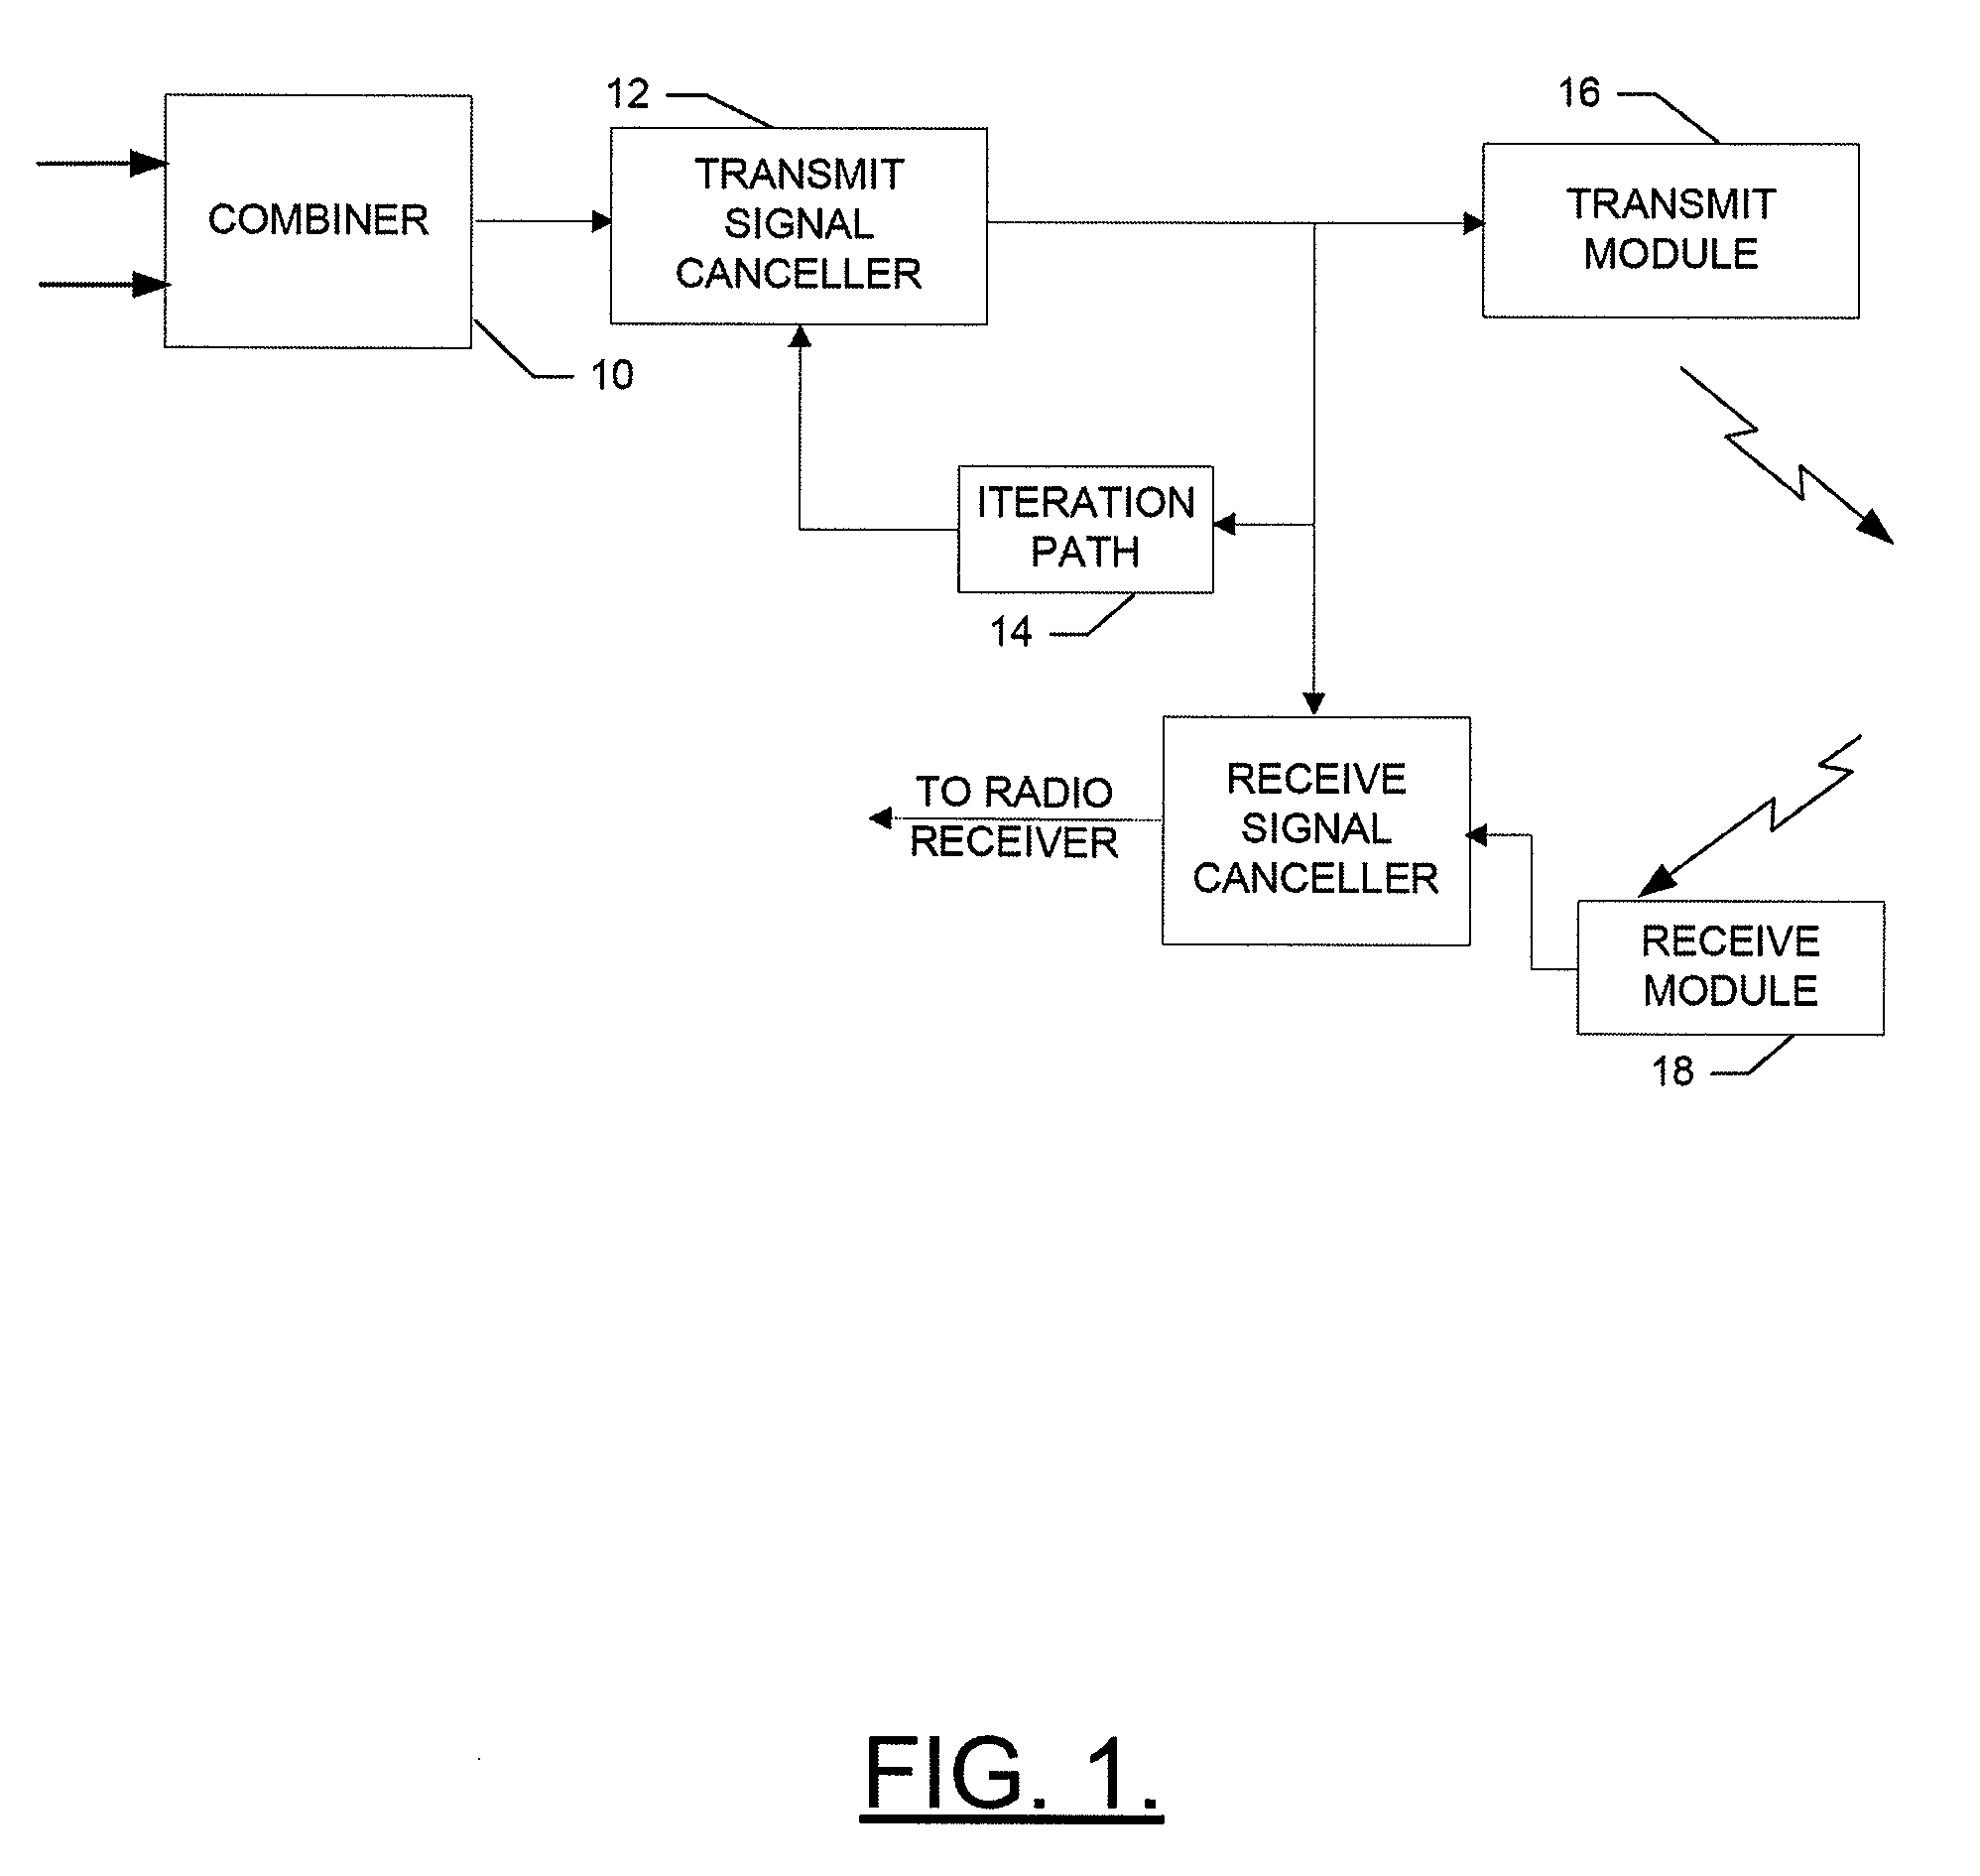 Method, apparatus and system for an omni digital package for reducing interference